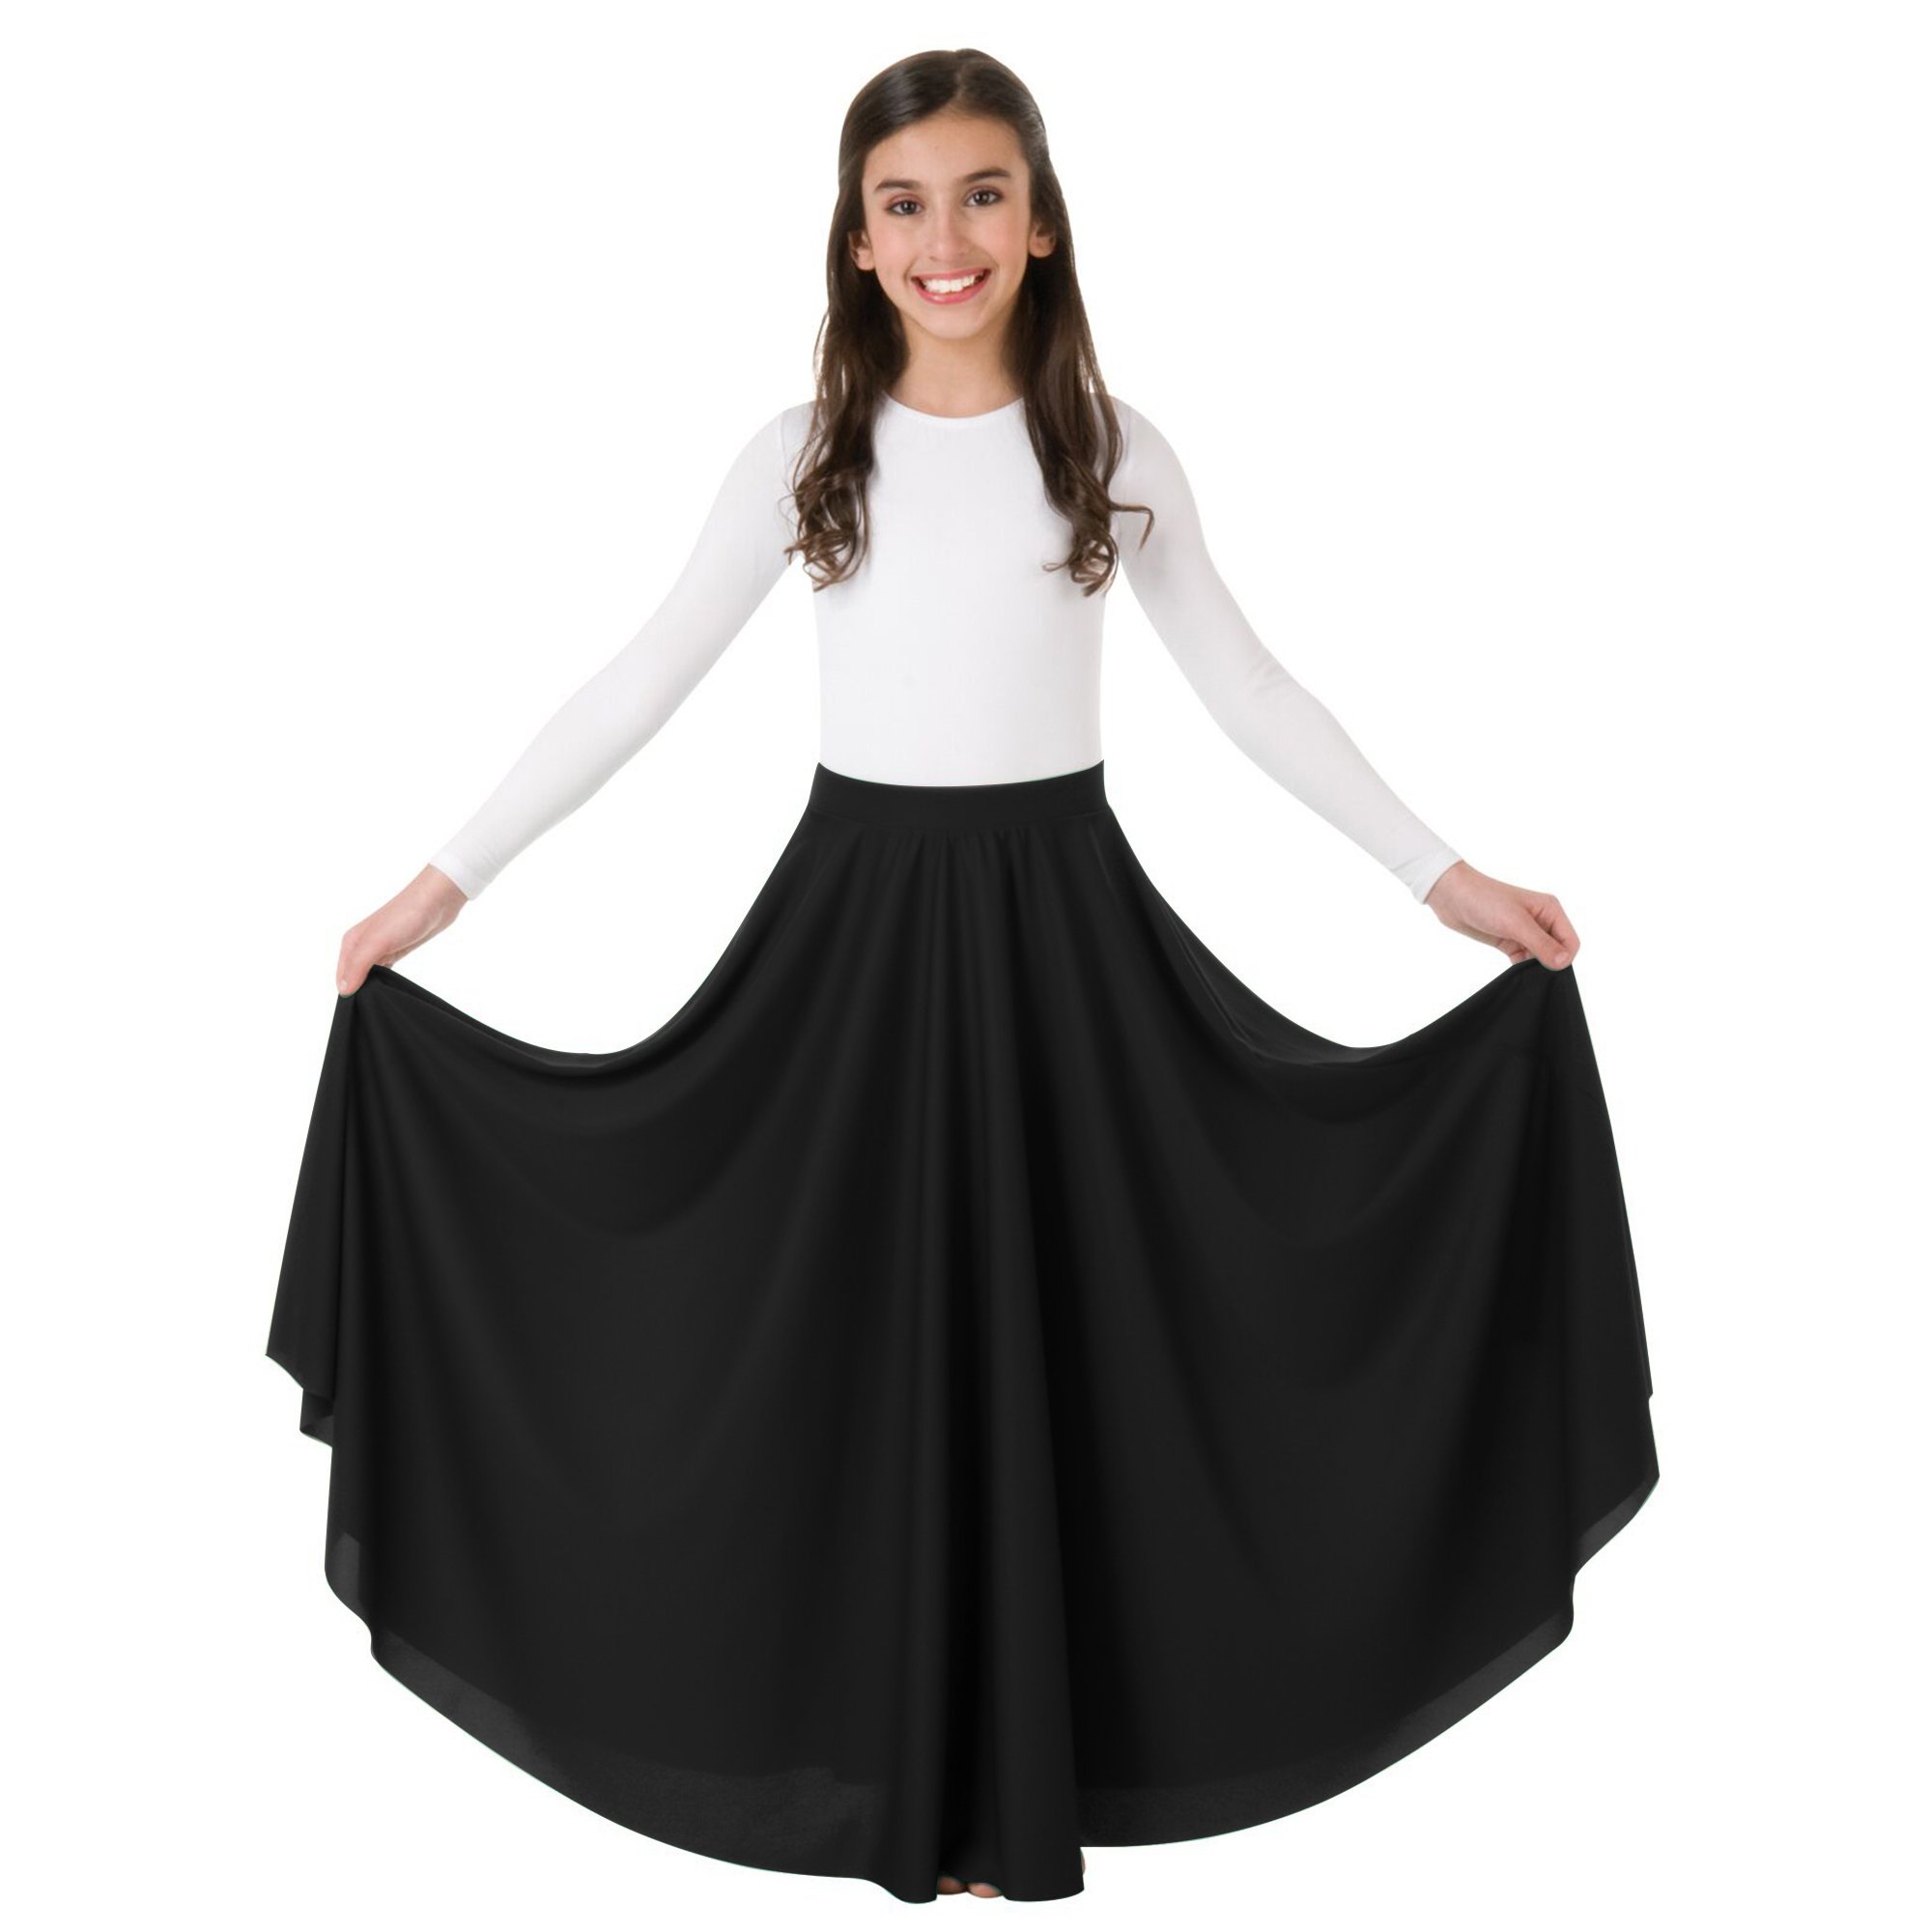 Body Wrappers Praise Dance Circle skirt [BWP501] - $31.99